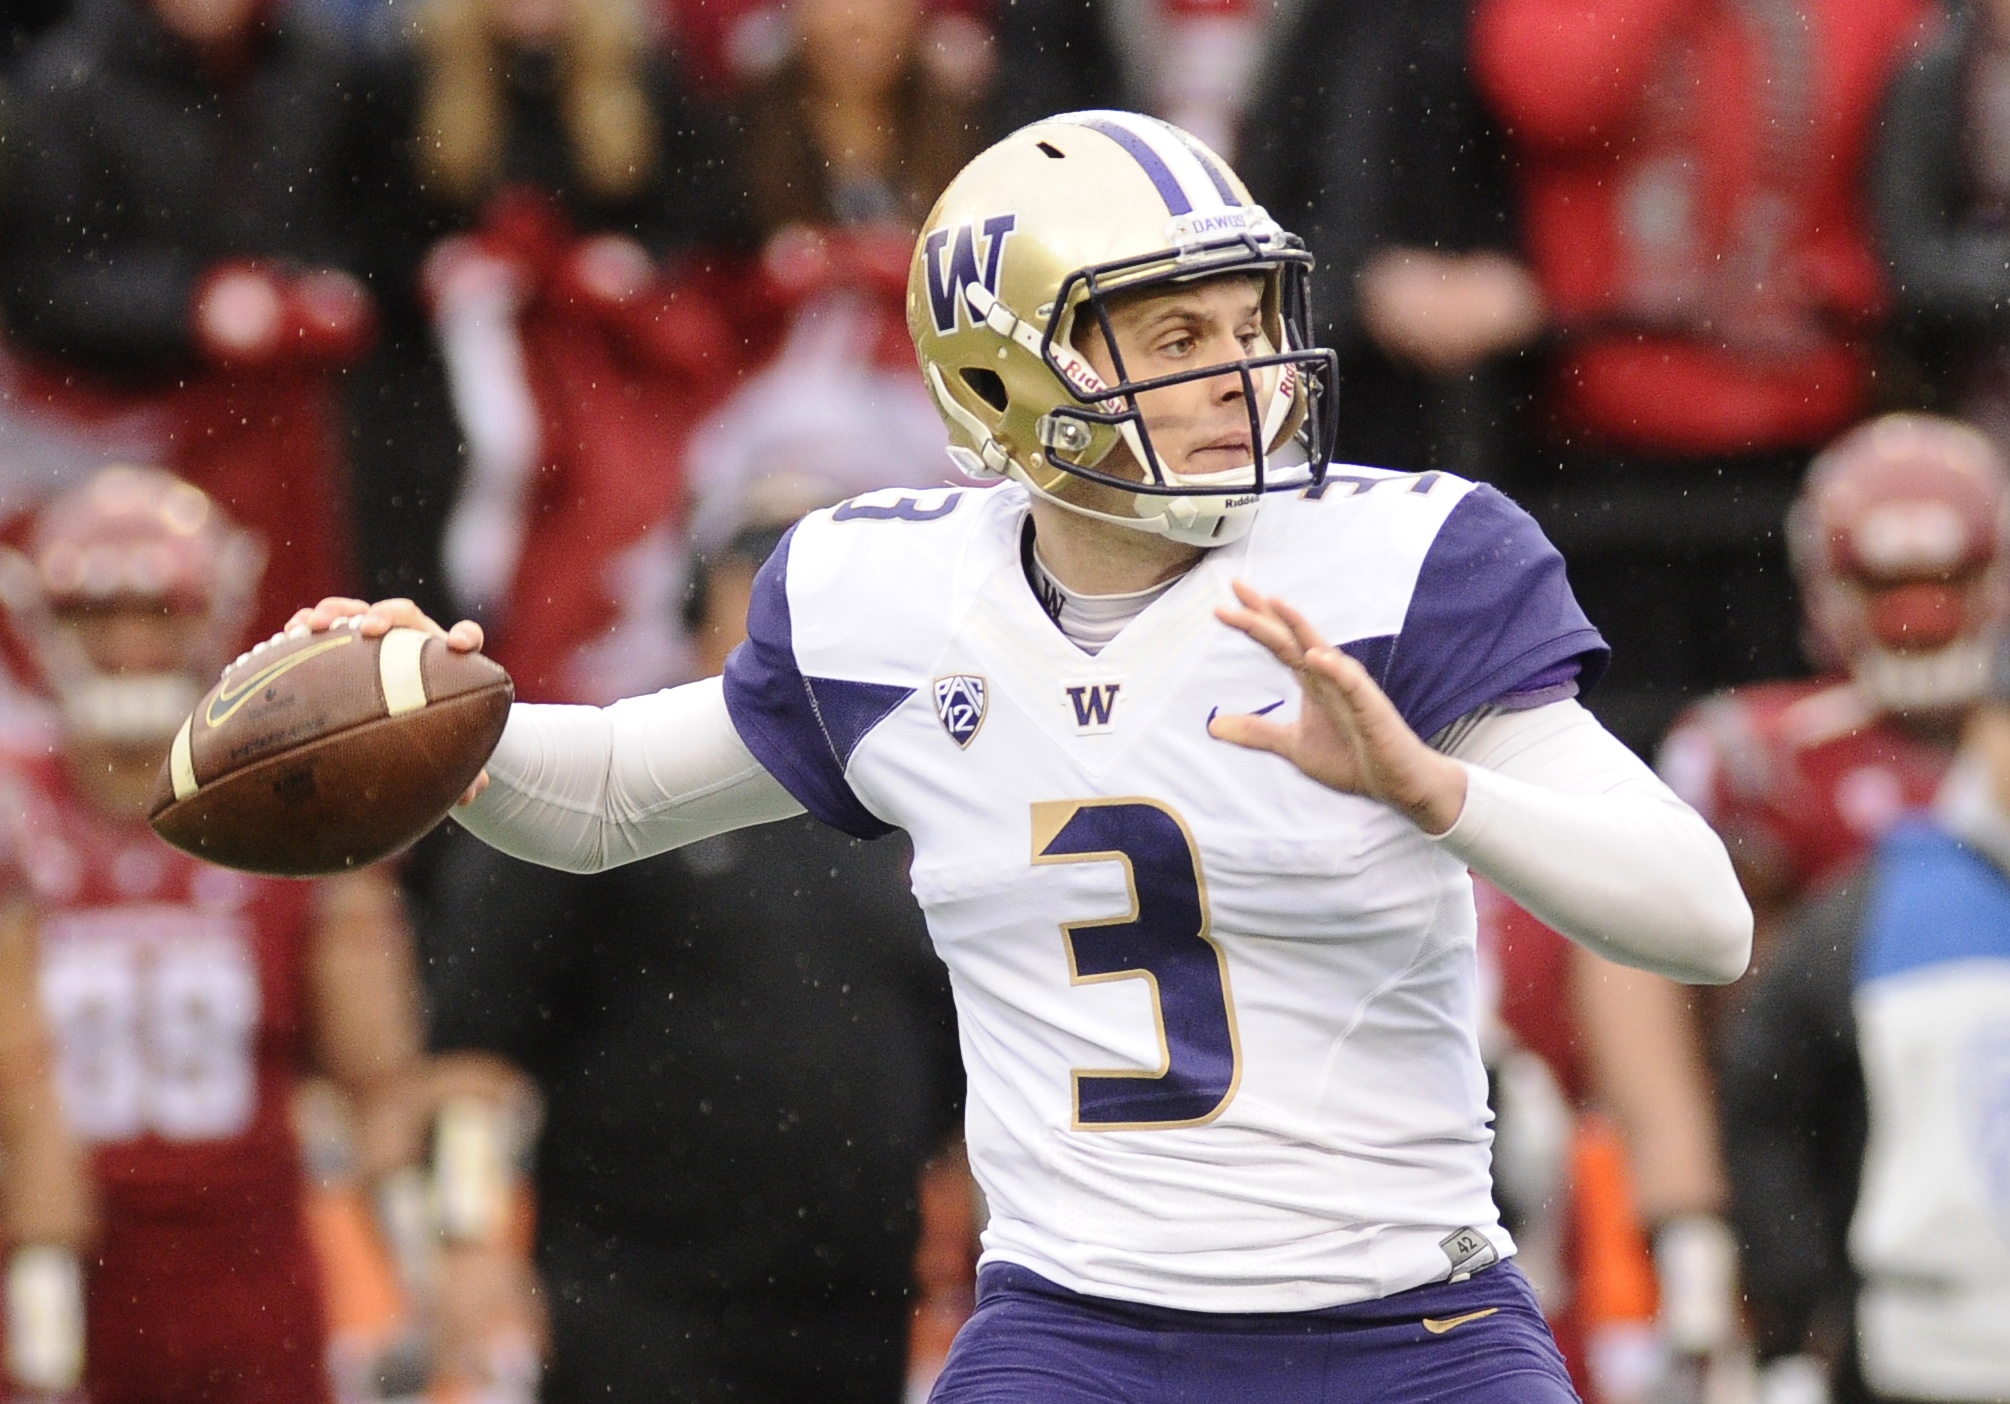 UW's Jake Browning named Pac12 offensive player of the year